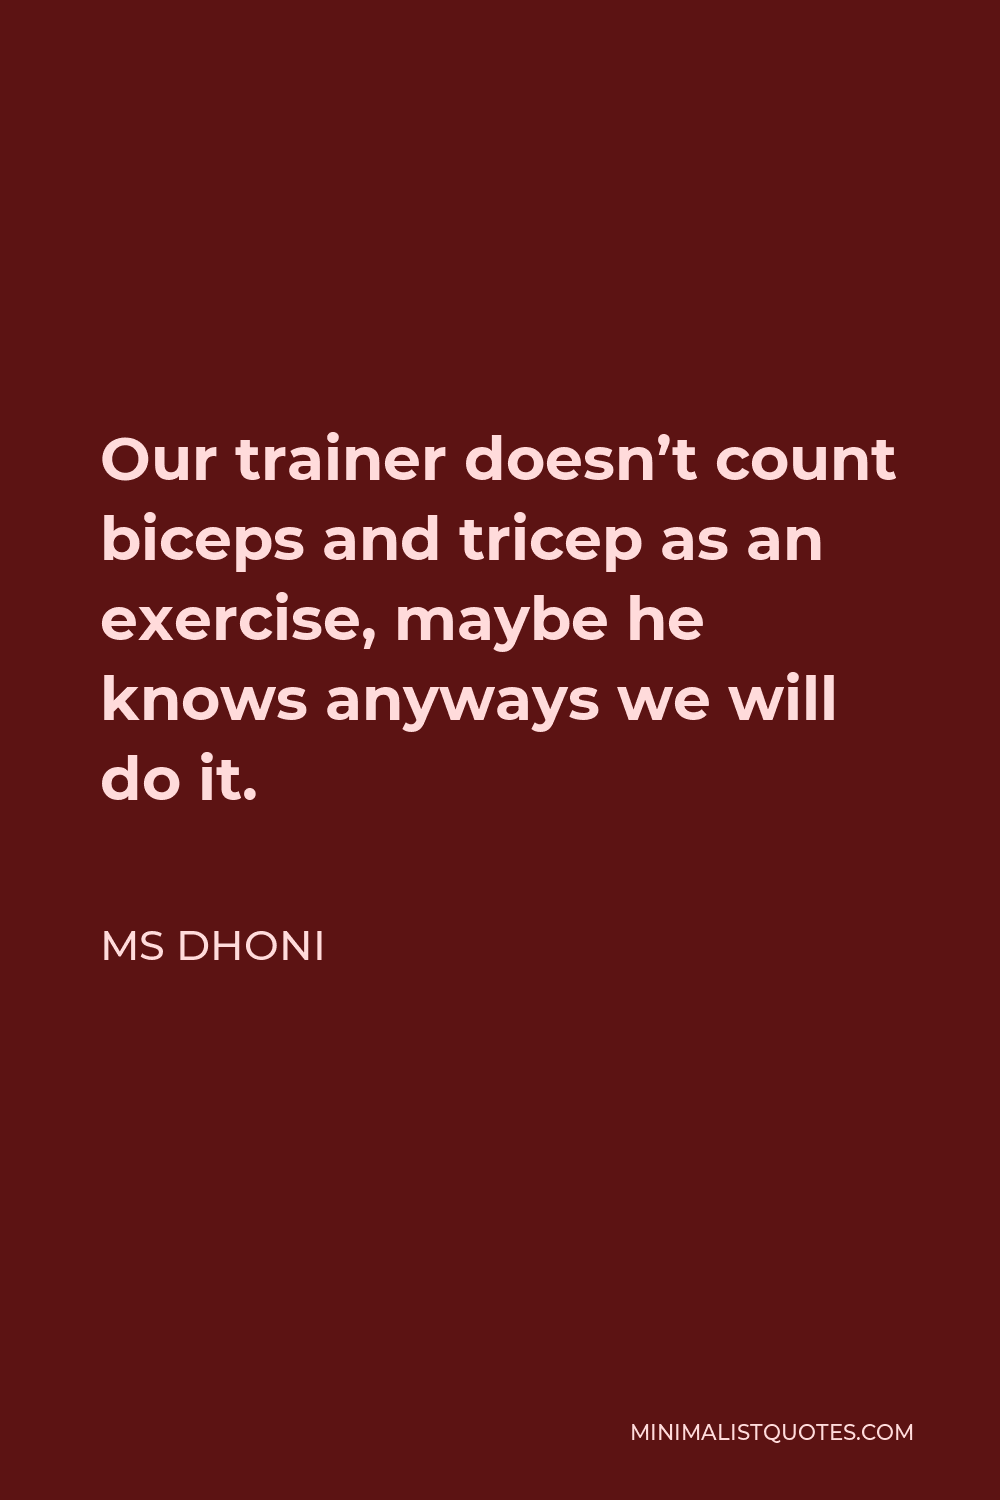 MS Dhoni Quote - Our trainer doesn’t count biceps and tricep as an exercise, maybe he knows anyways we will do it.